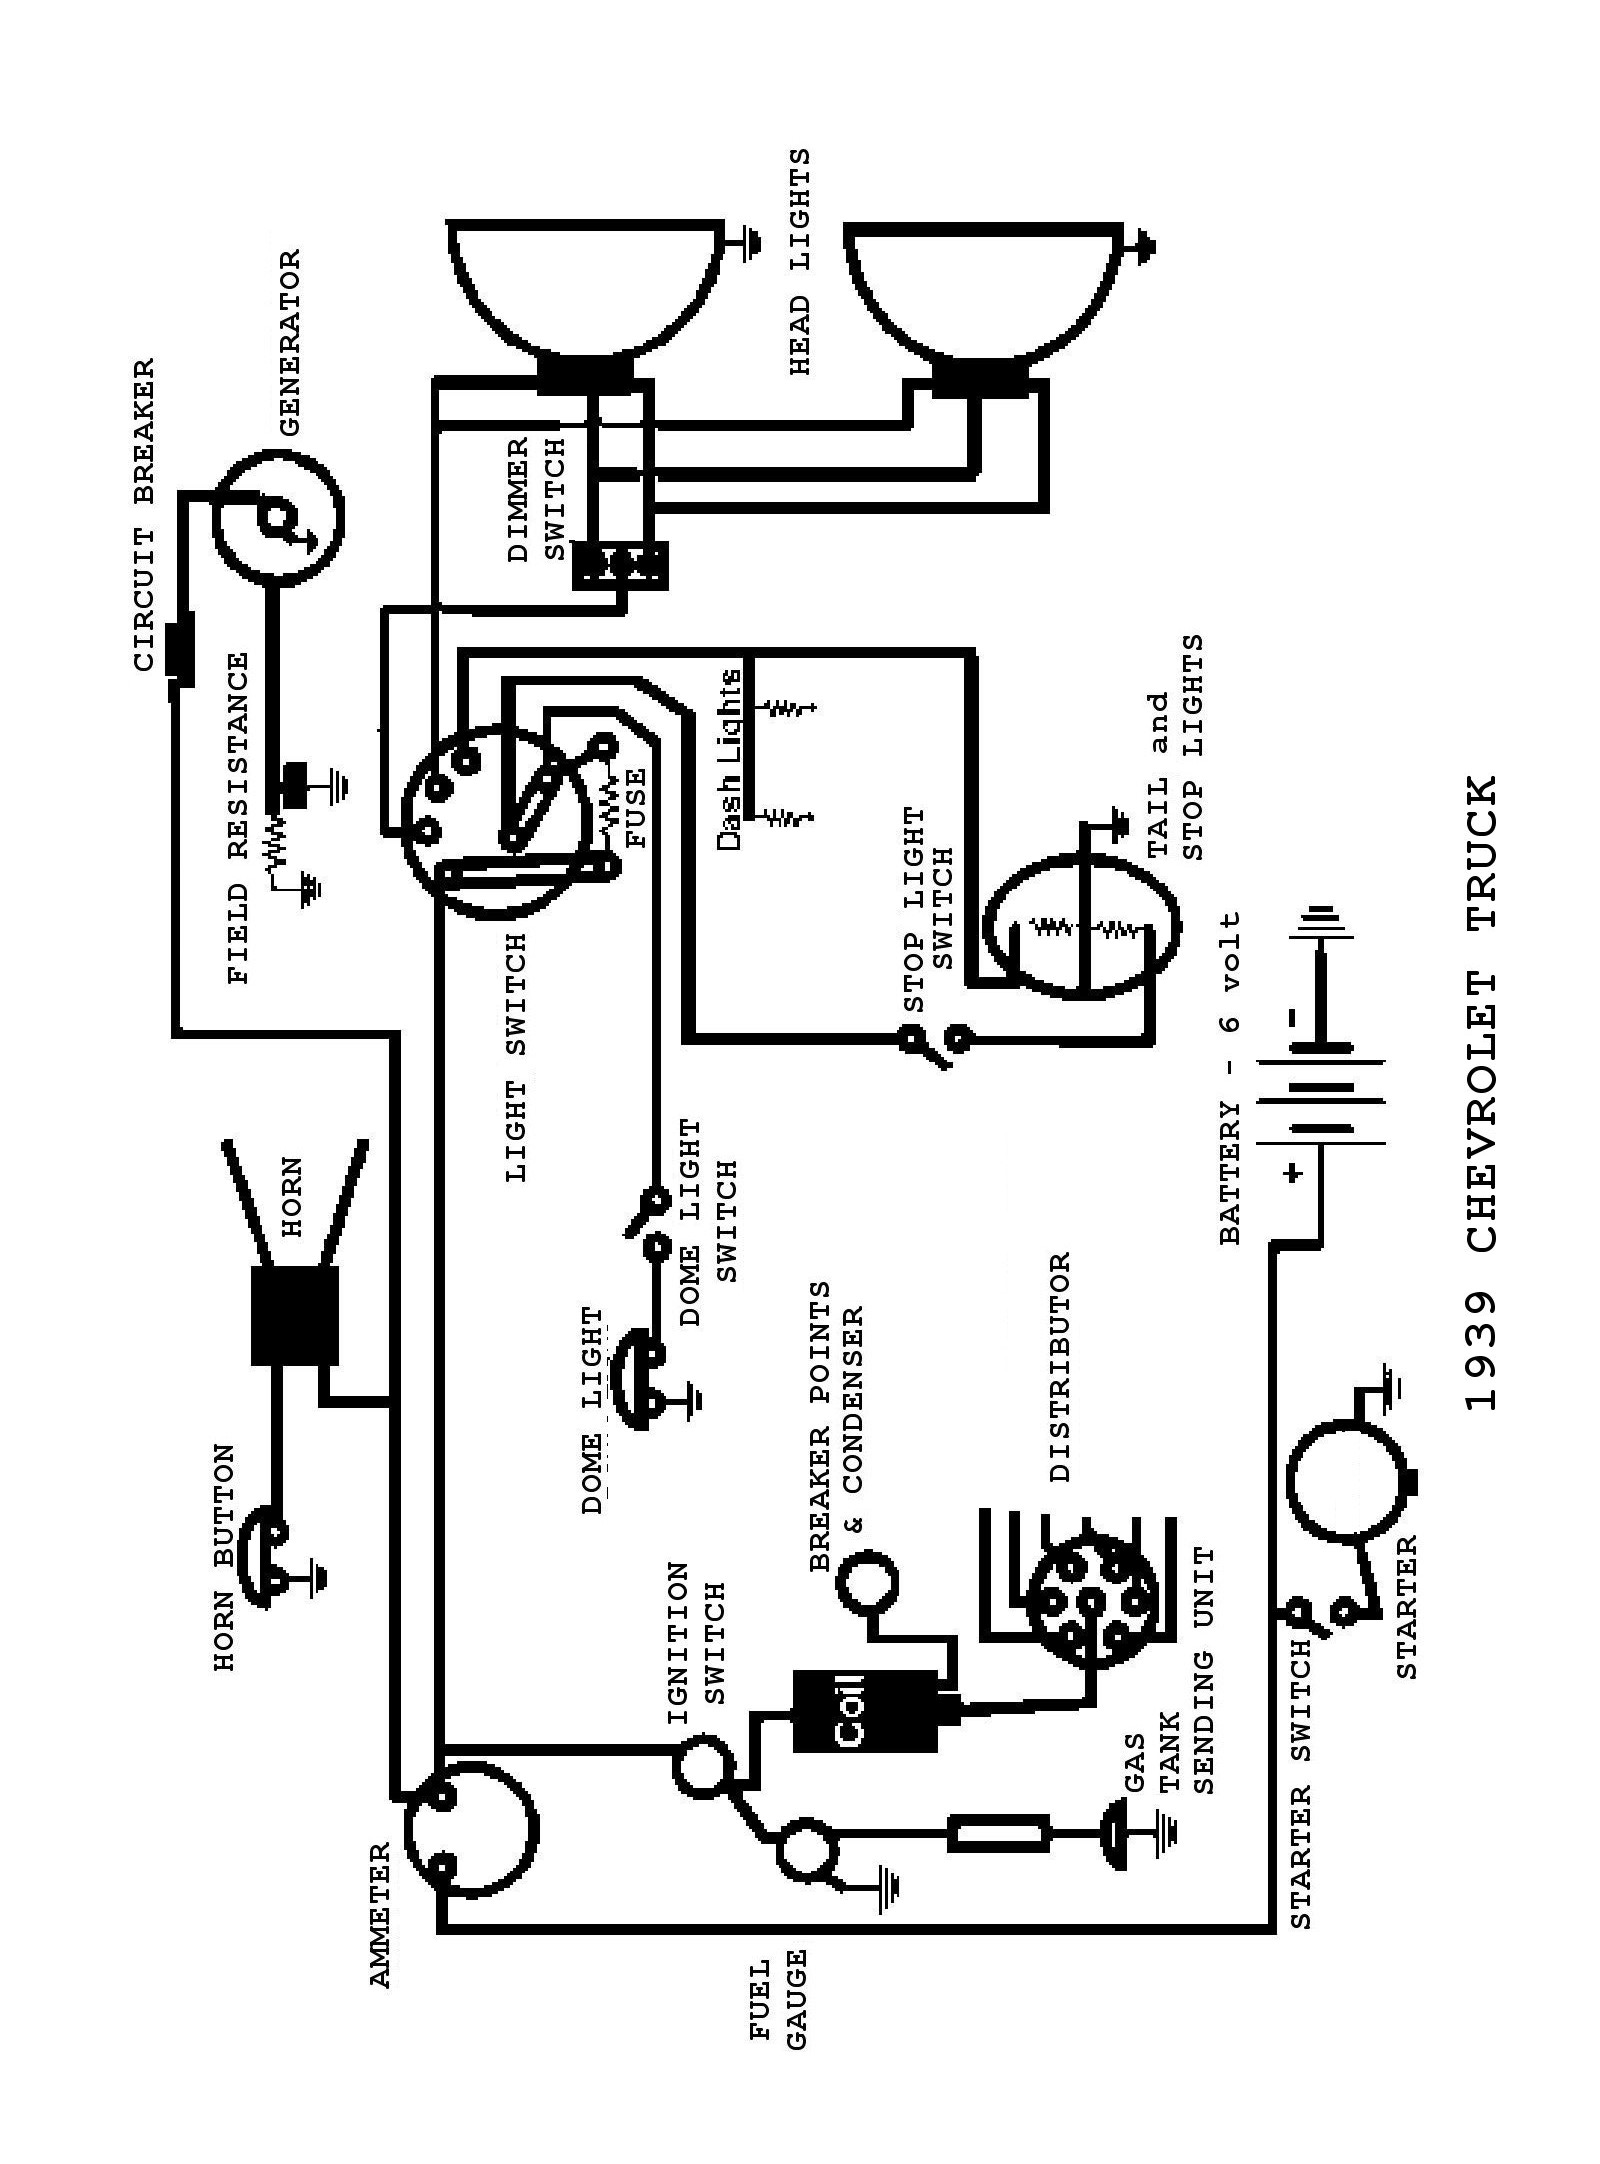 Chevy Wiring Diagrams